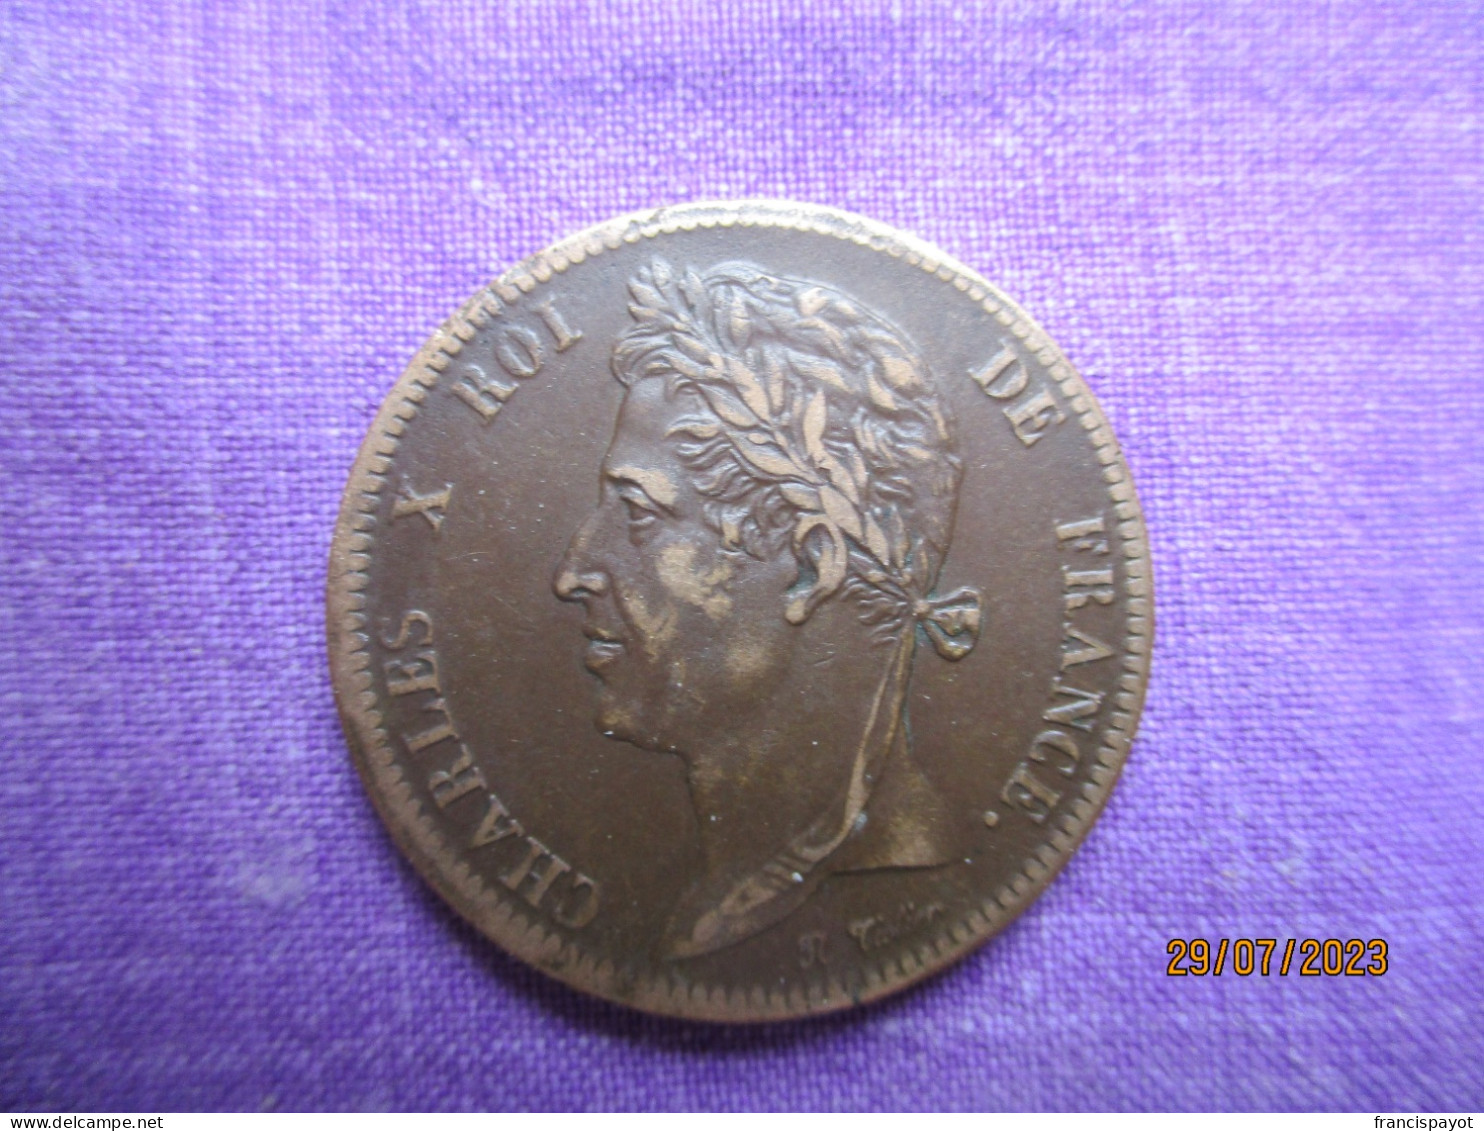 France: 5 Centimes Colonies 1828 - French Colonies (1817-1844)